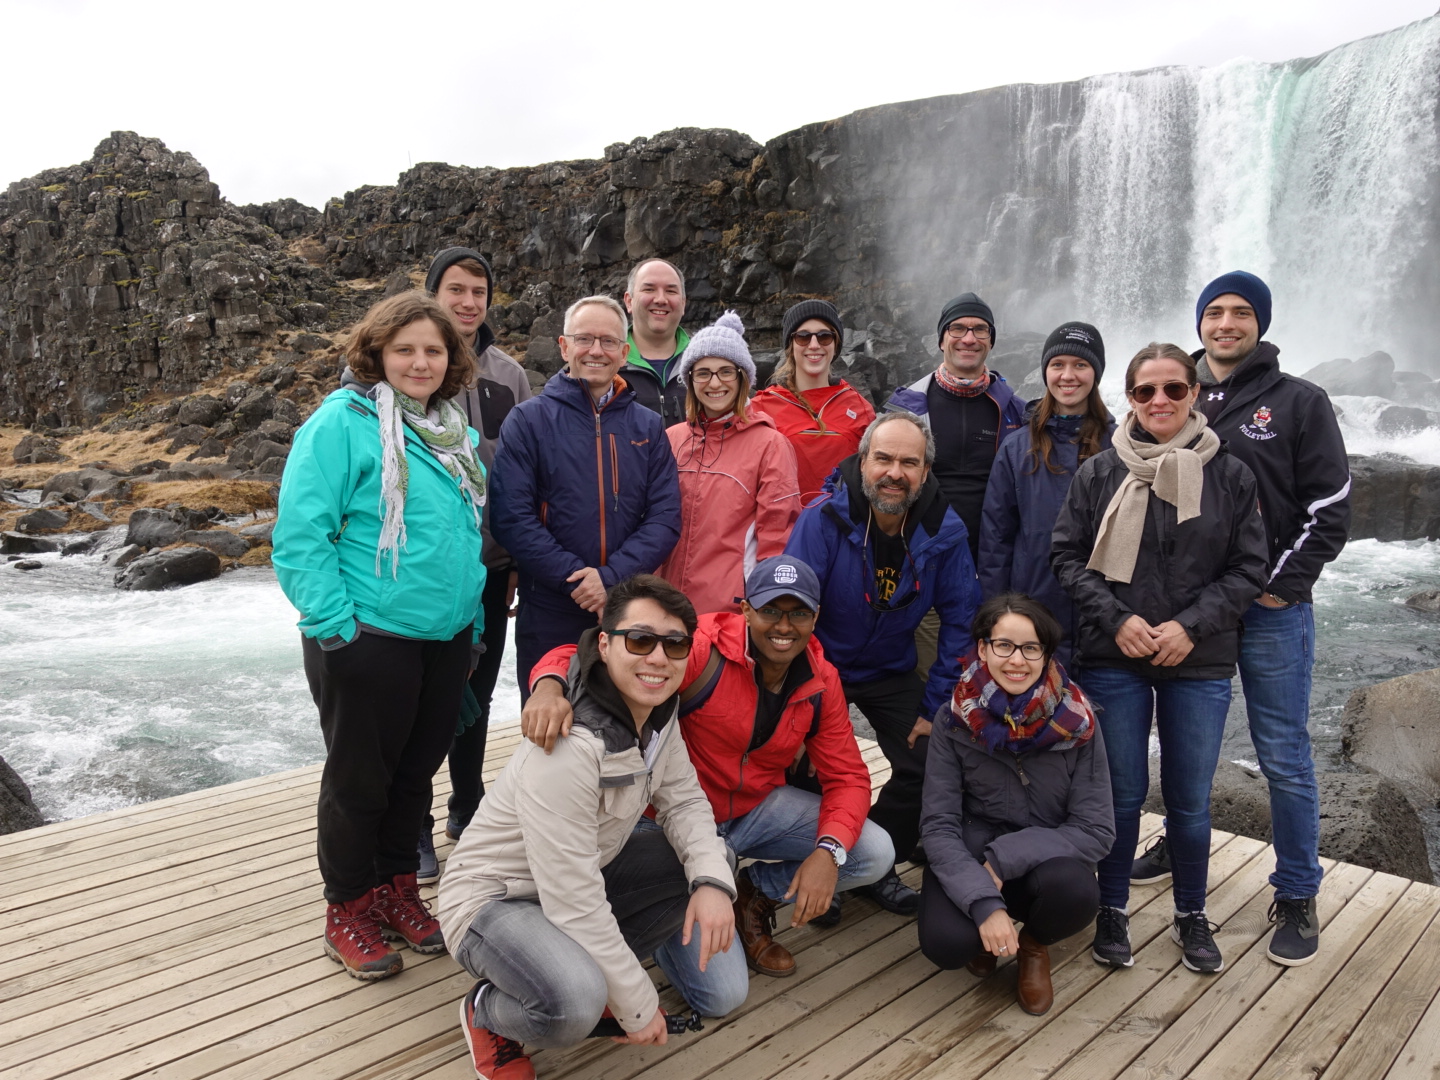 University of Alberta students and instructors are pictured with their Icelandic hosts in the rift valley at Thingvellir National Park, Iceland situated between the North American and Eurasian tectonic plates.